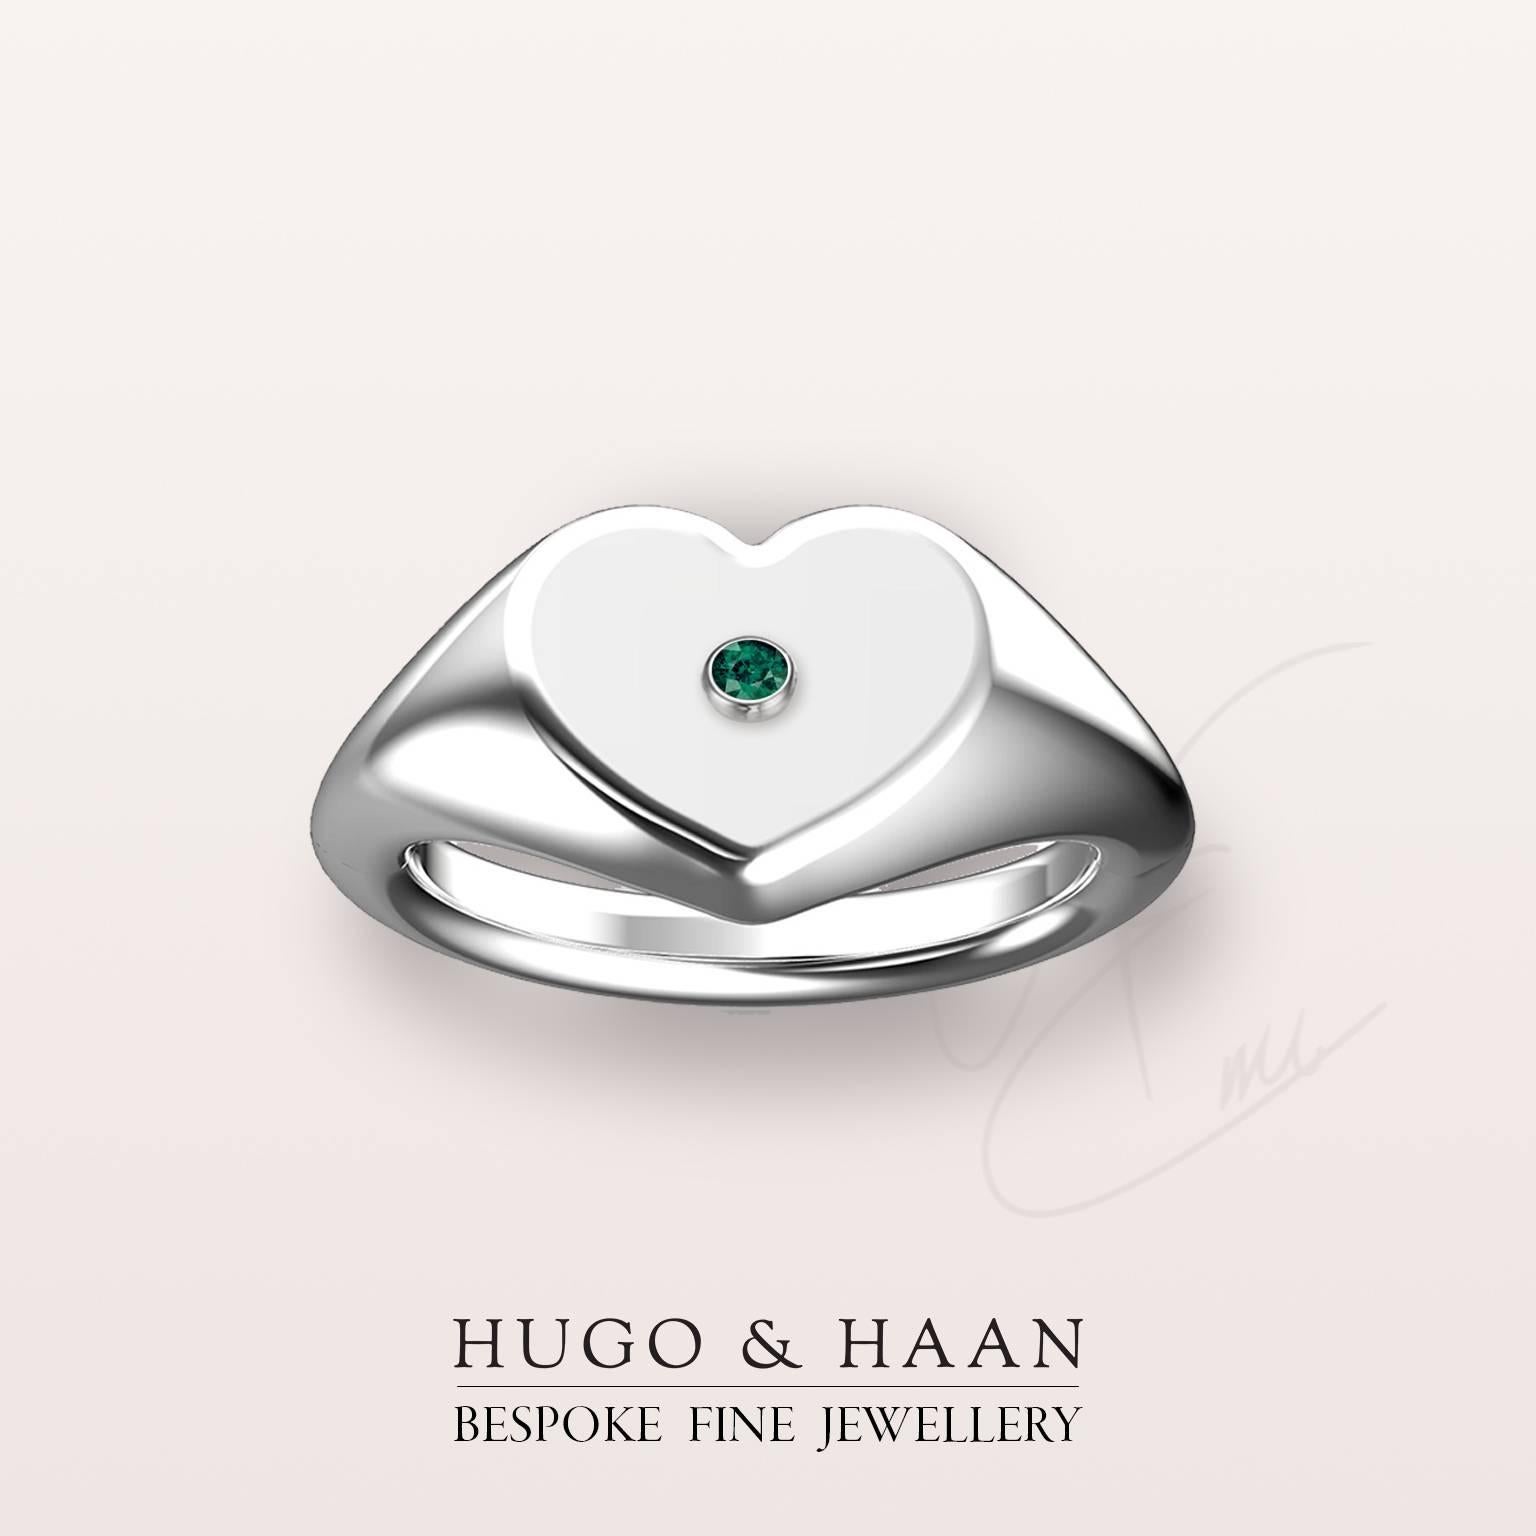 Details:

Material : 18k White Gold
Principle Gemstone : Emerald
Other Gemstone : -
Customizable: Yes

Options to customize: 

Metals available : Platinum, 18kt Yellow Gold or 18kt White Gold
Gemstones Available : Most semi-precious and precious